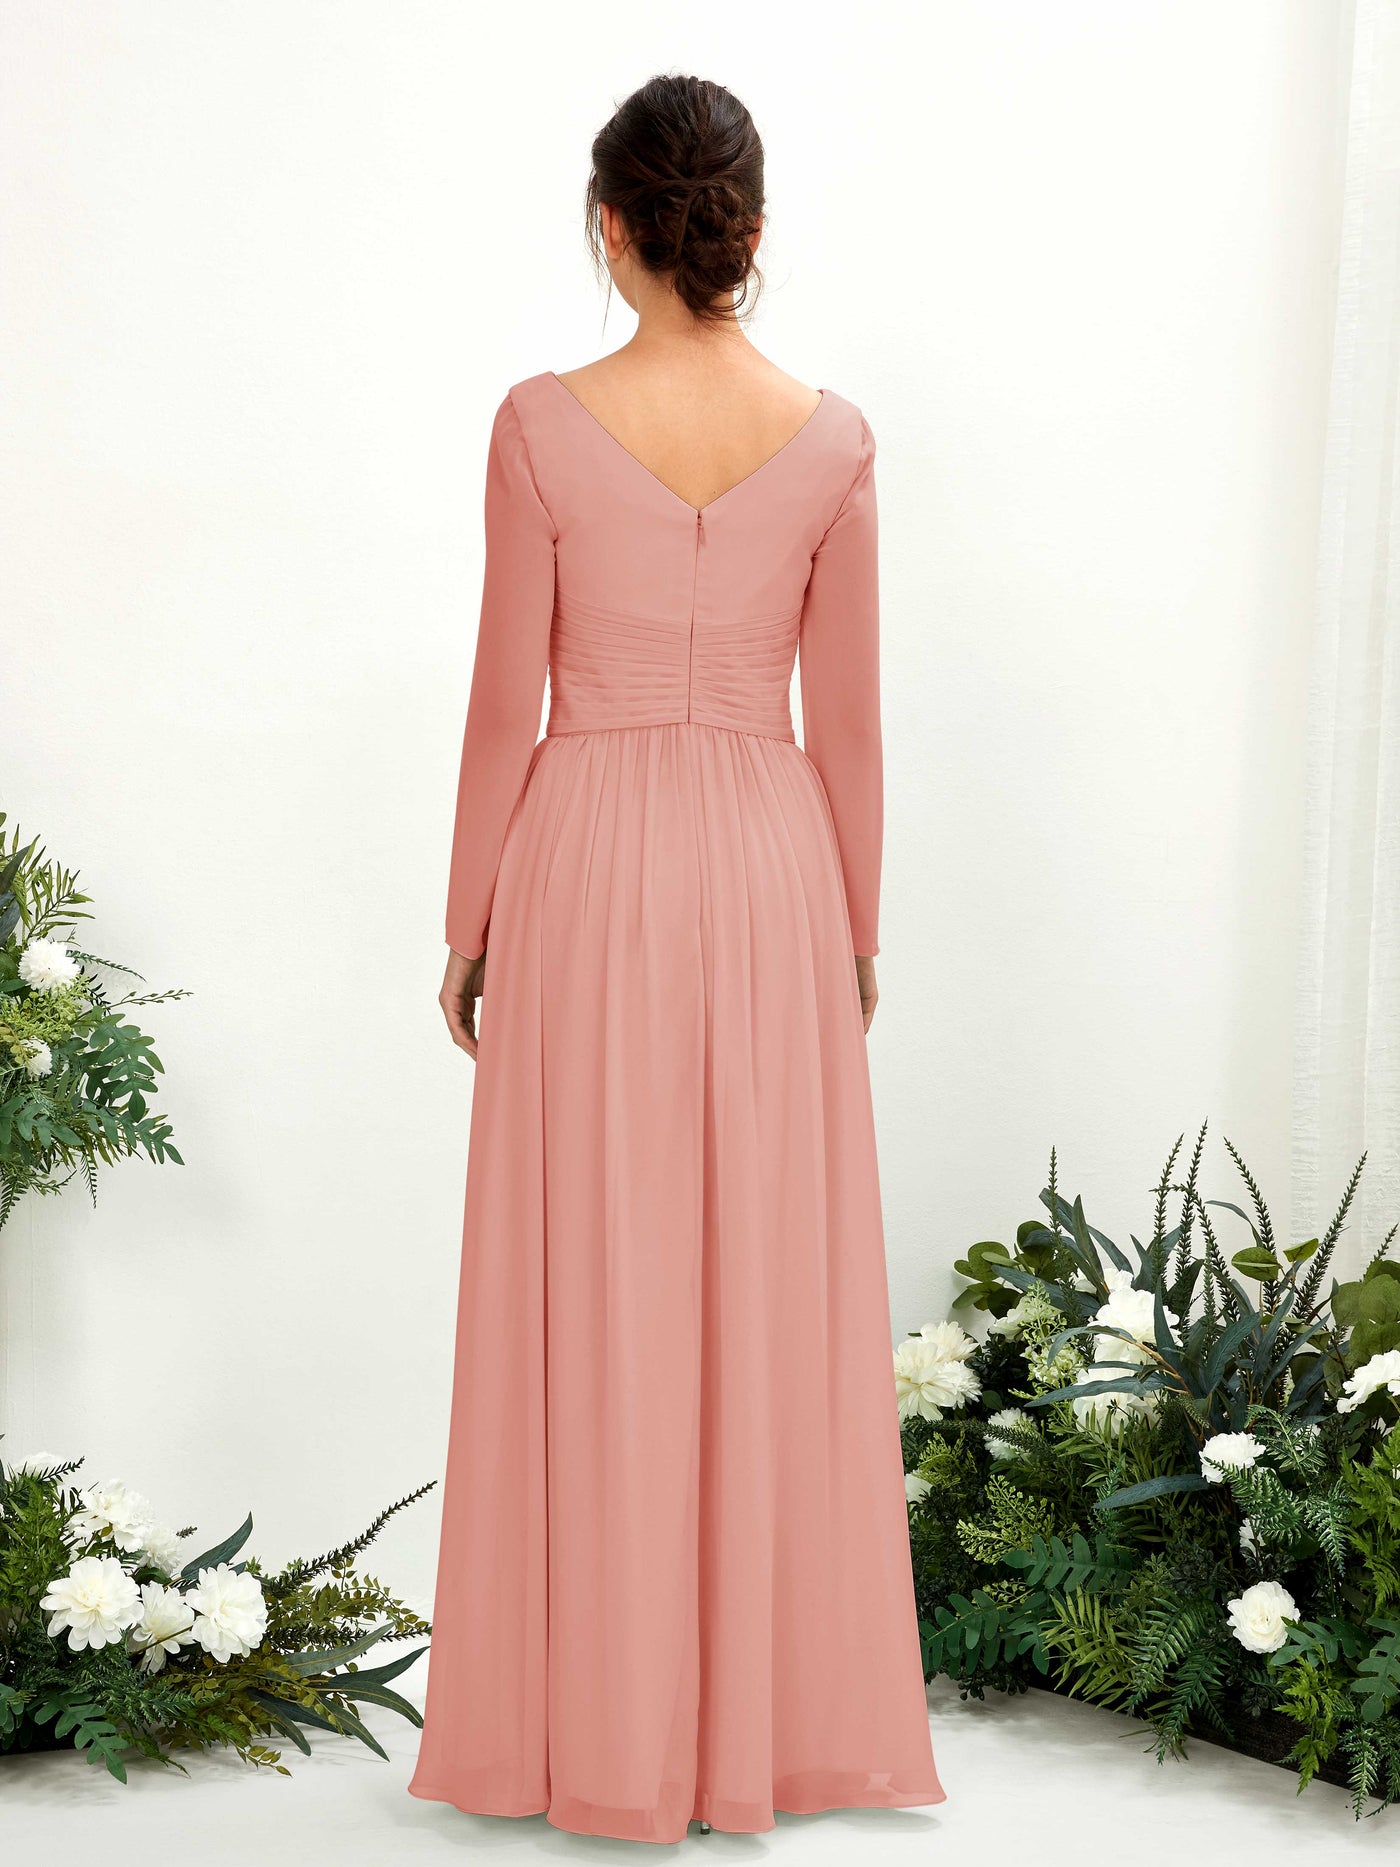 Champagne Rose Bridesmaid Dresses Bridesmaid Dress A-line Chiffon V-neck Full Length Long Sleeves Wedding Party Dress (81220306)#color_champagne-rose